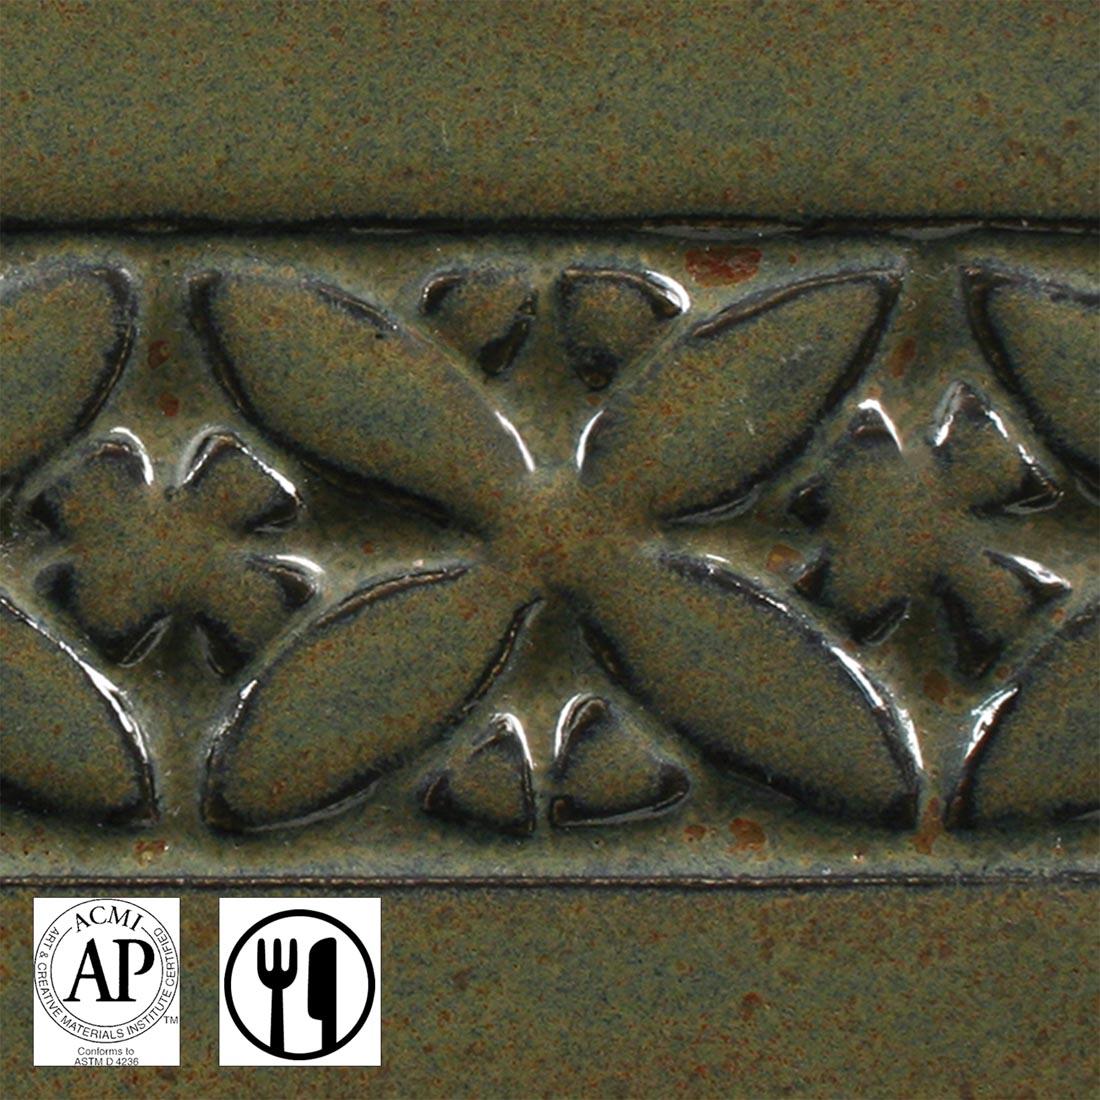 clay tile with Ironstone AMACO Potter's Choice High Fire Glaze applied; symbols for AP Seal and food safe